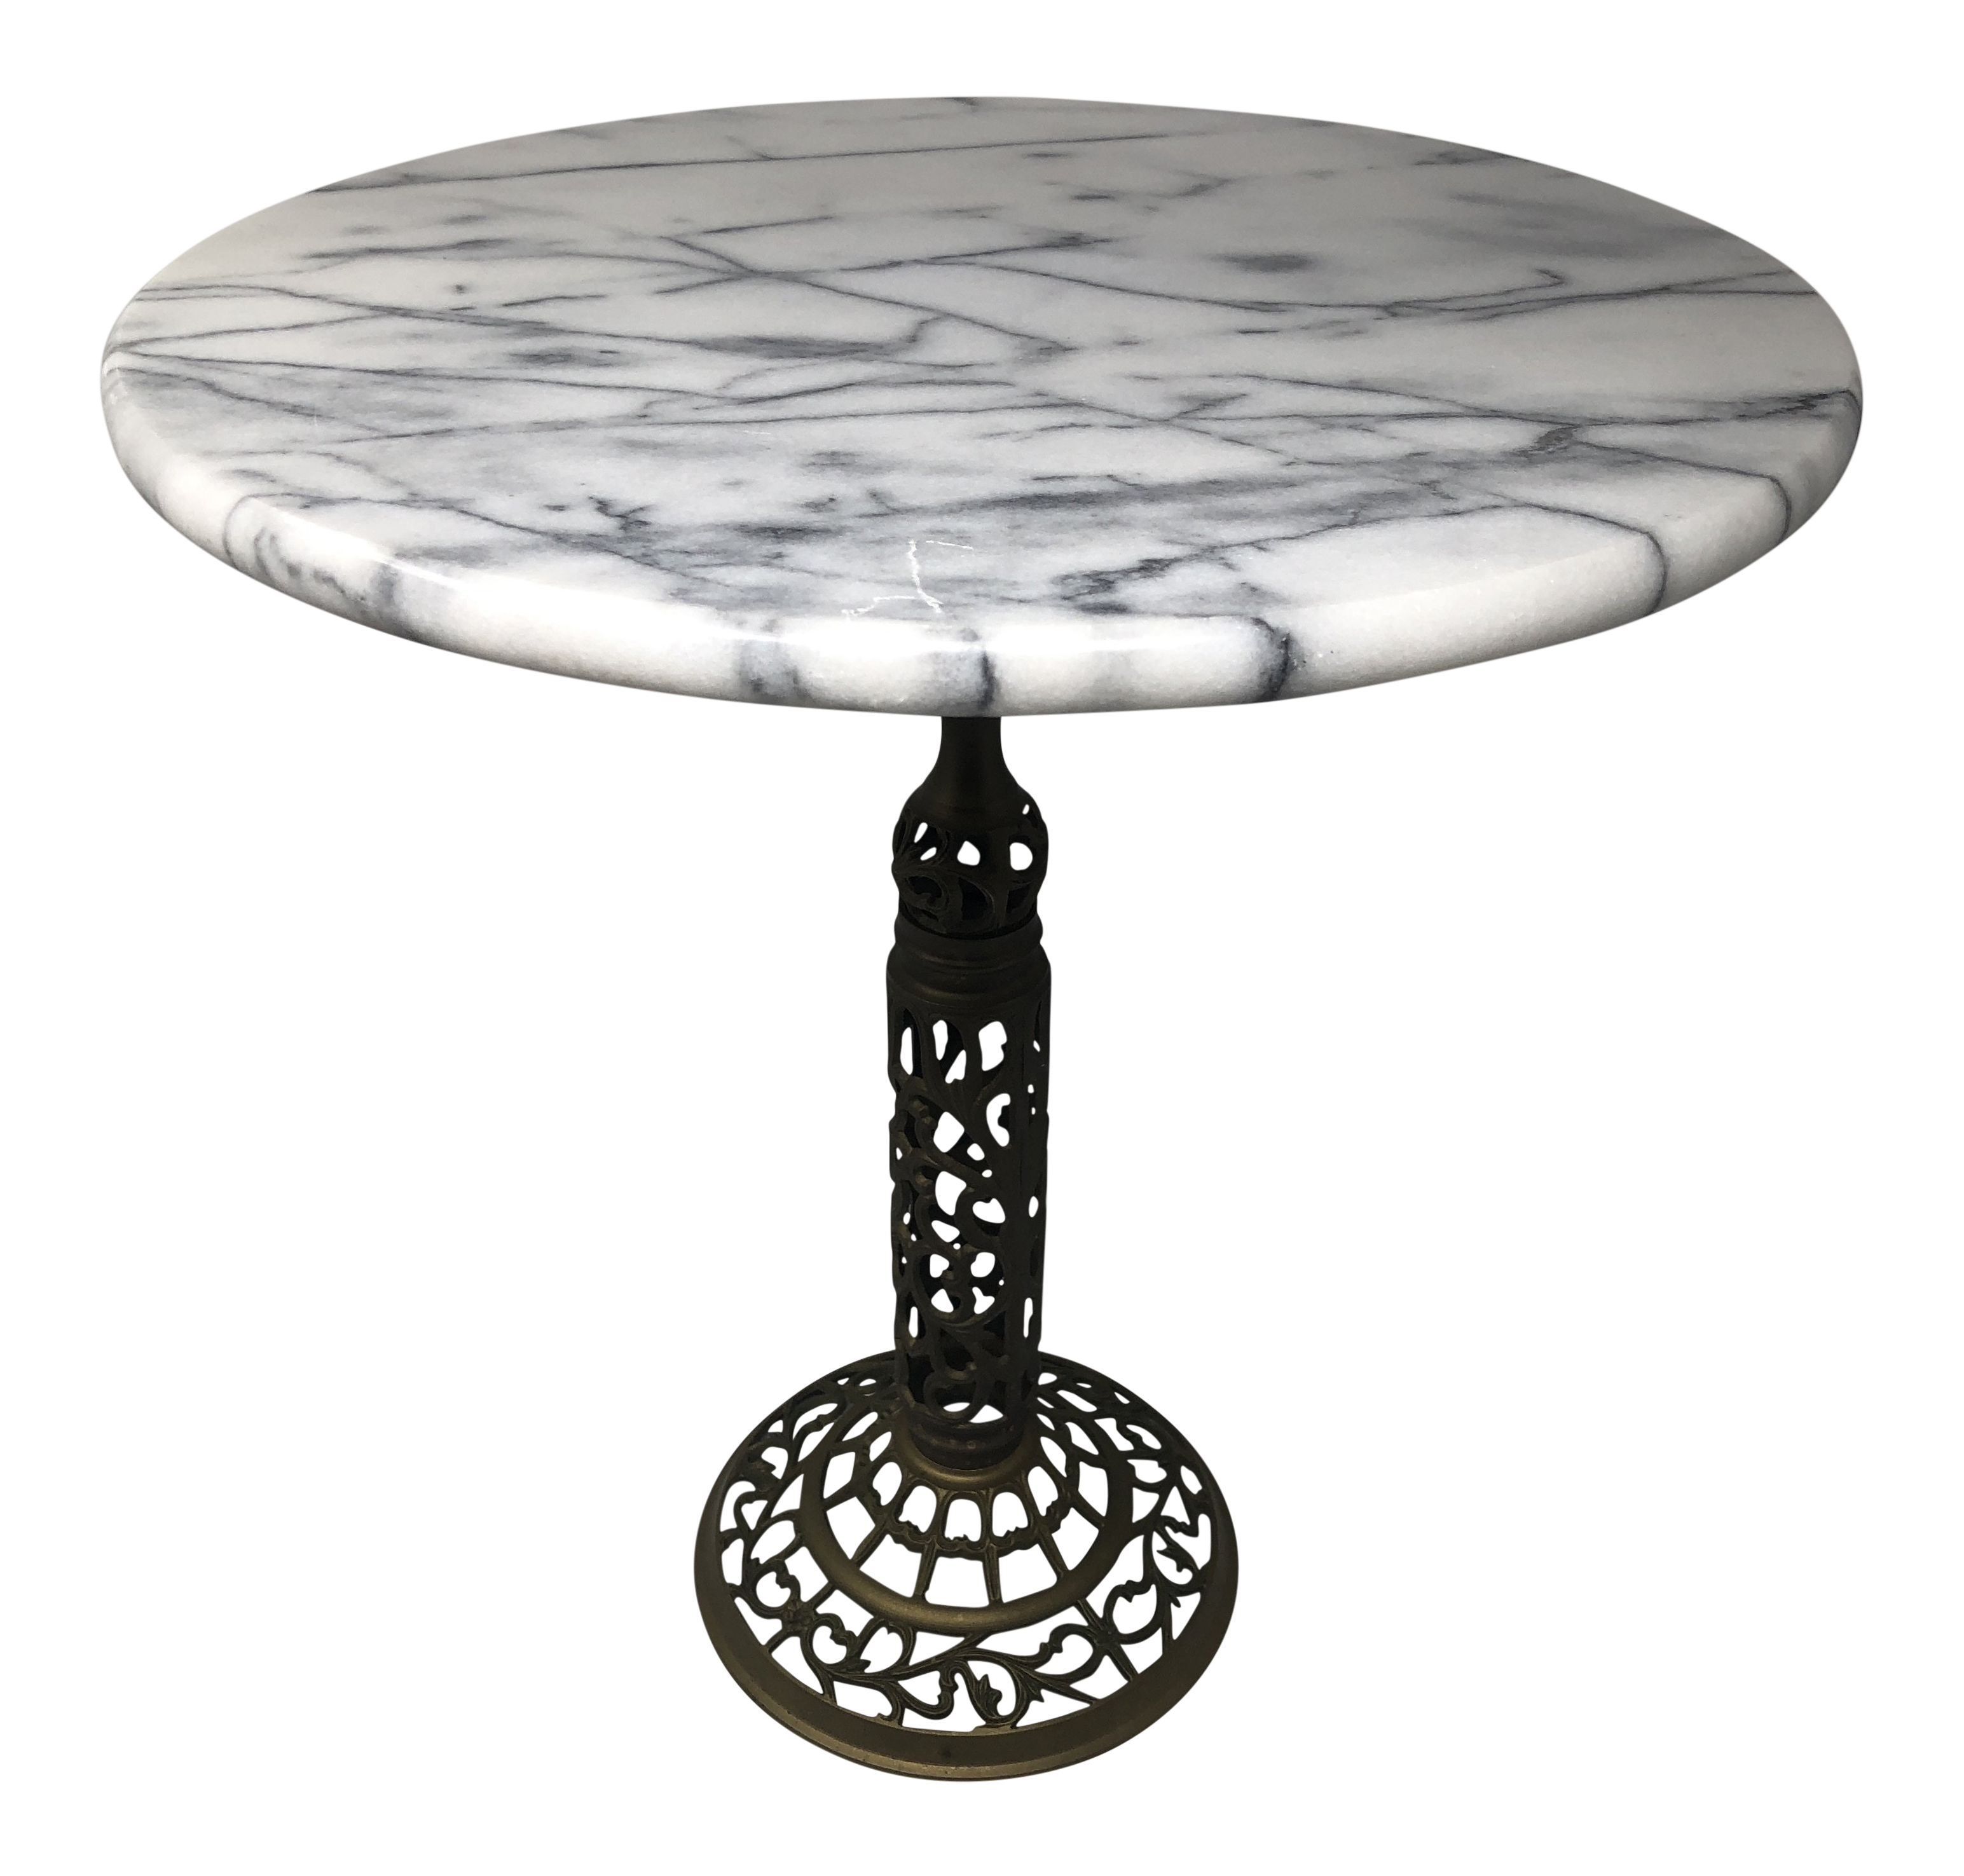 vintage marble and brass filigree accent table chairish white adjustable metal legs small house plans nesting console tables wicker end sectional furniture patio chairs mosaic top